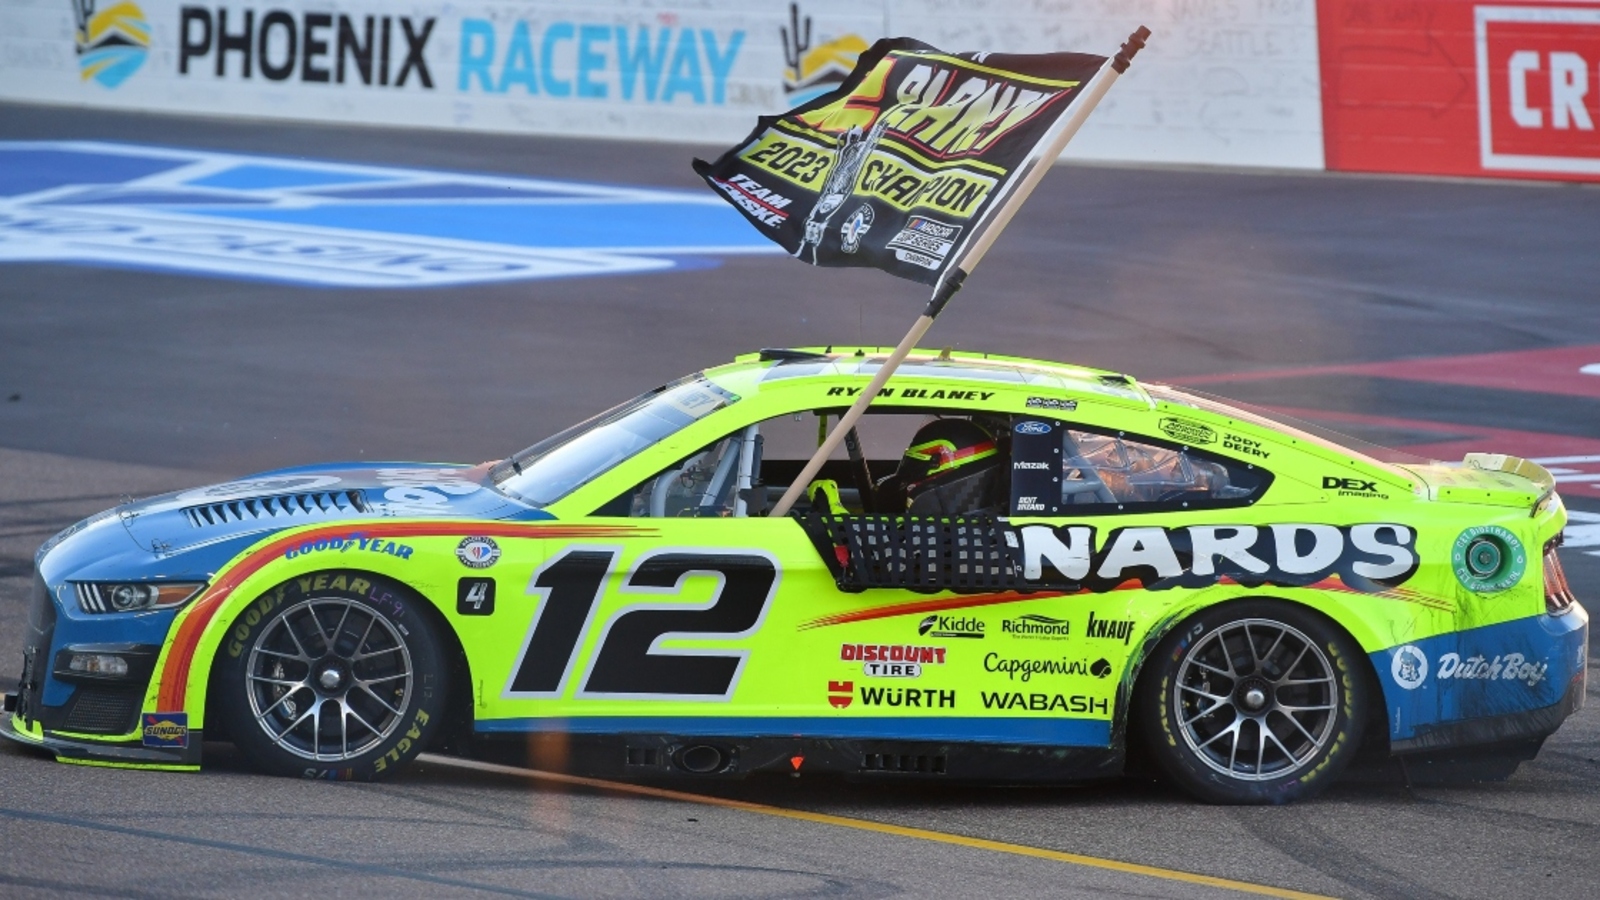 Ryan Blaney opens up about team’s emotions after his NASCAR championship victory